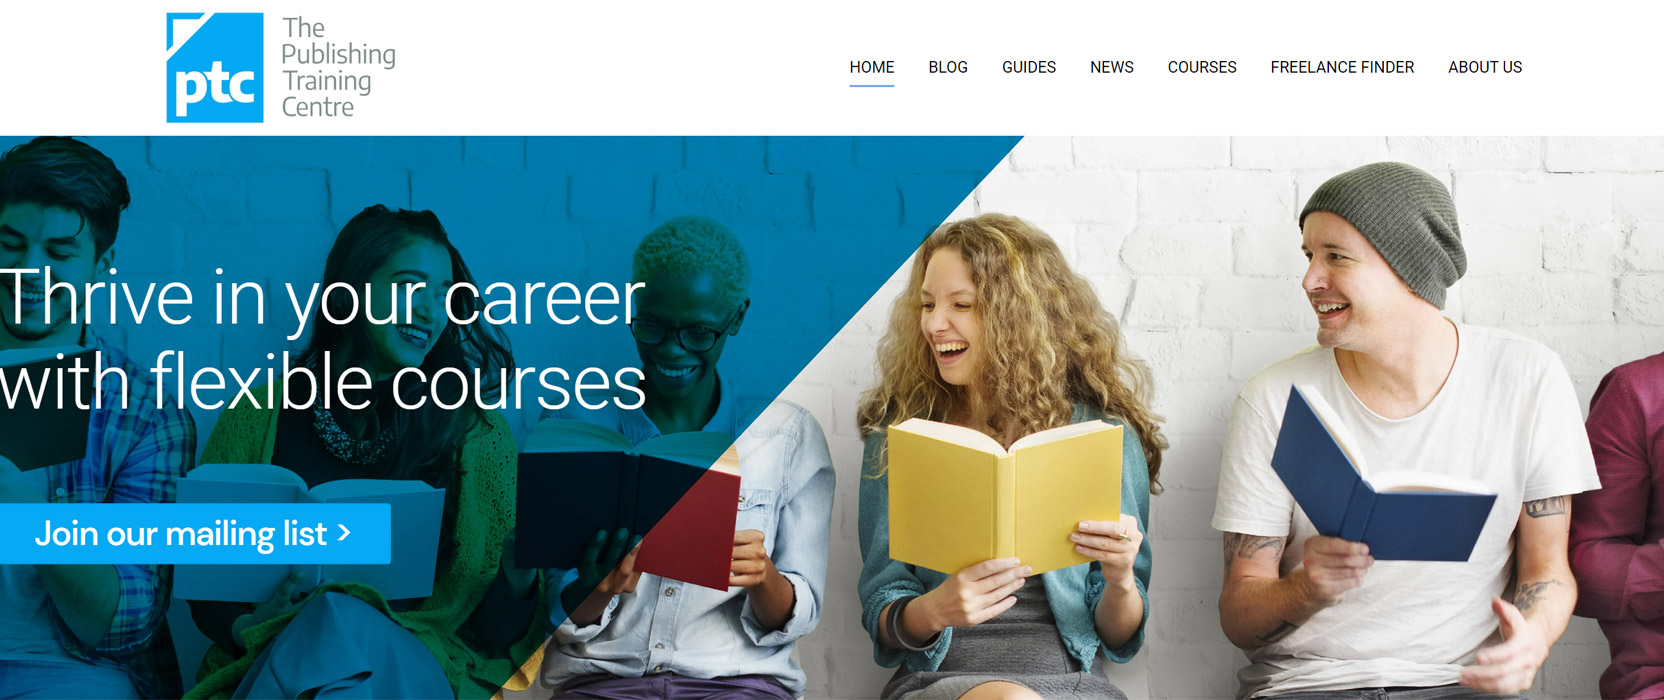 Screenshot of the Publishing Training Centre homepage